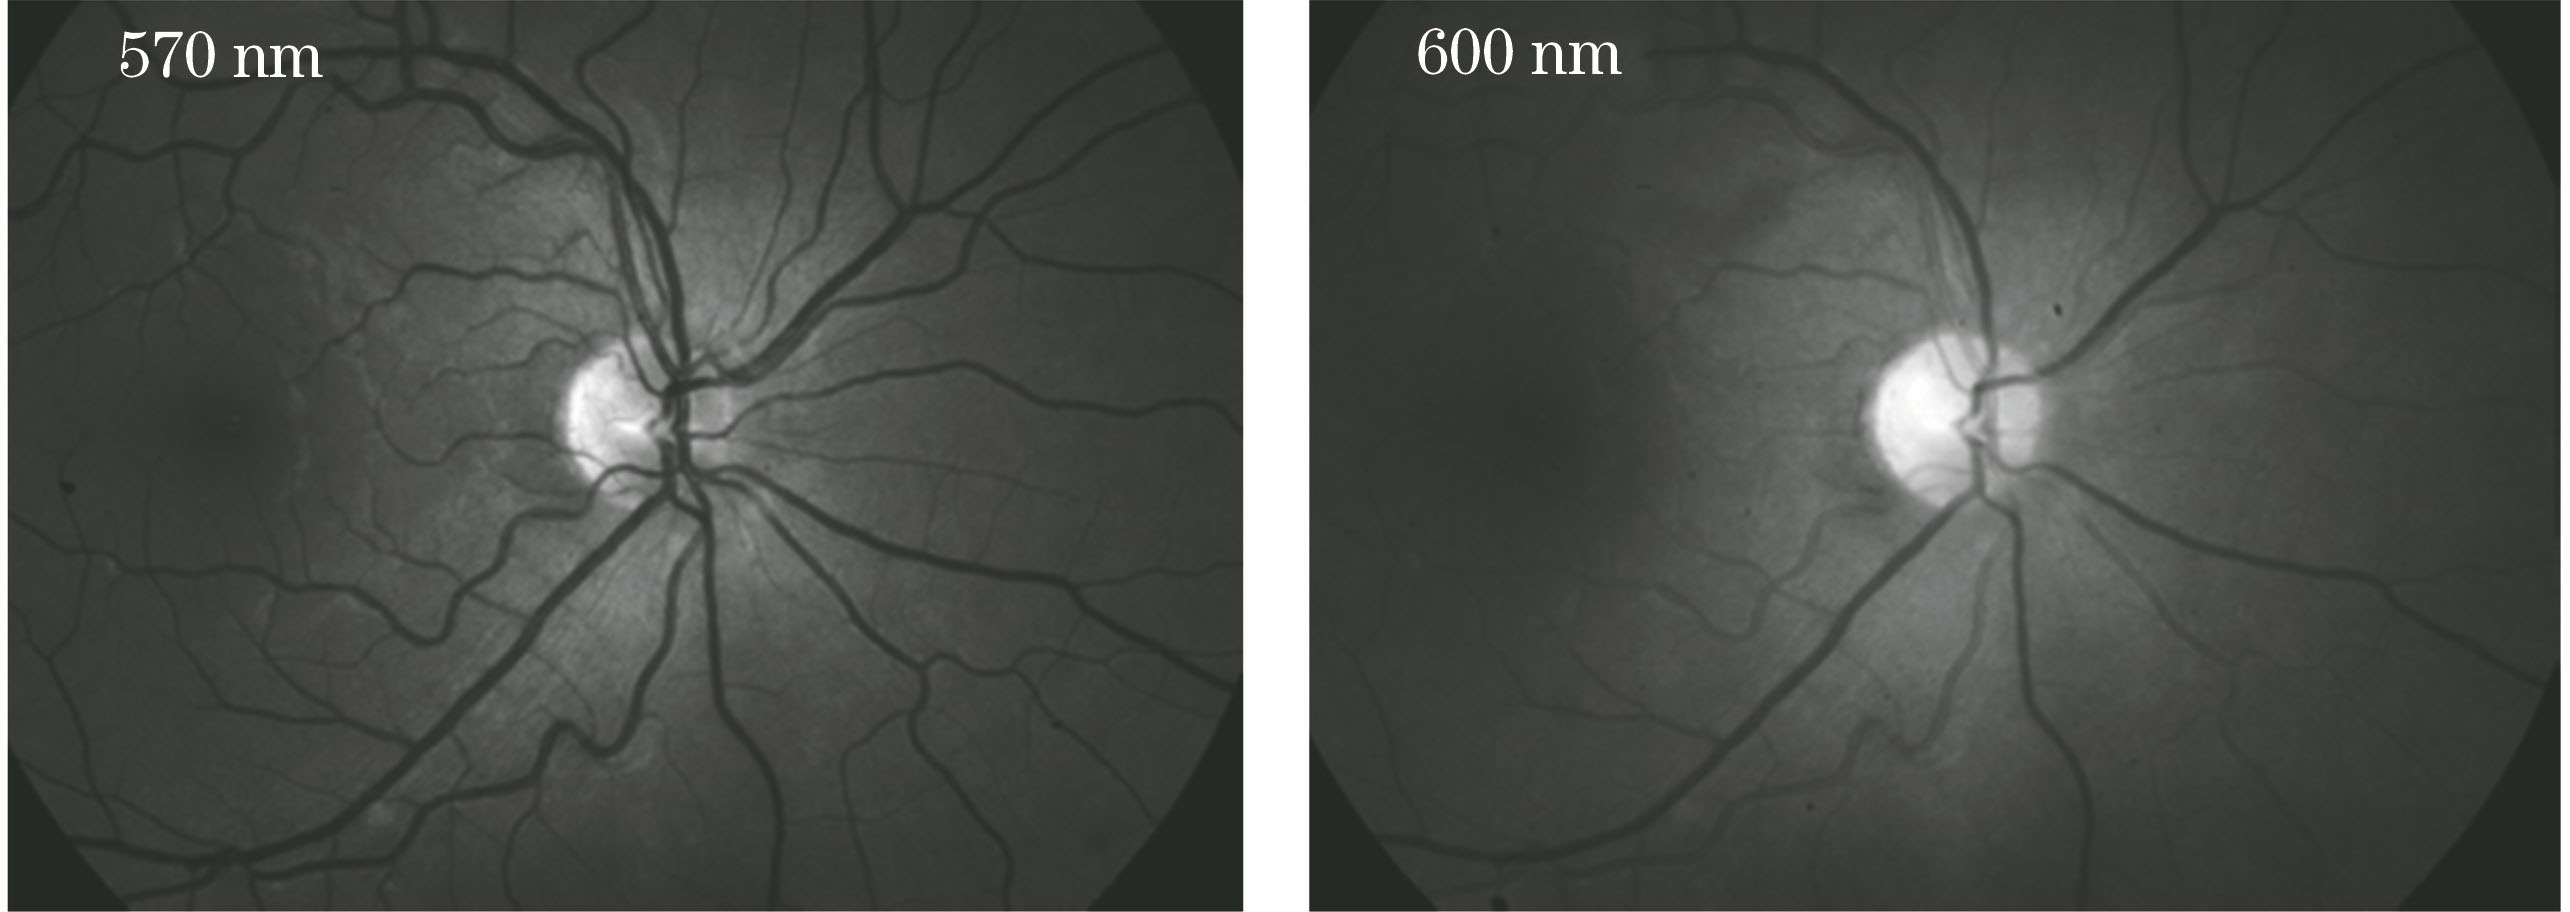 Fundus images at wavelengths of 570 nm and 600 nm